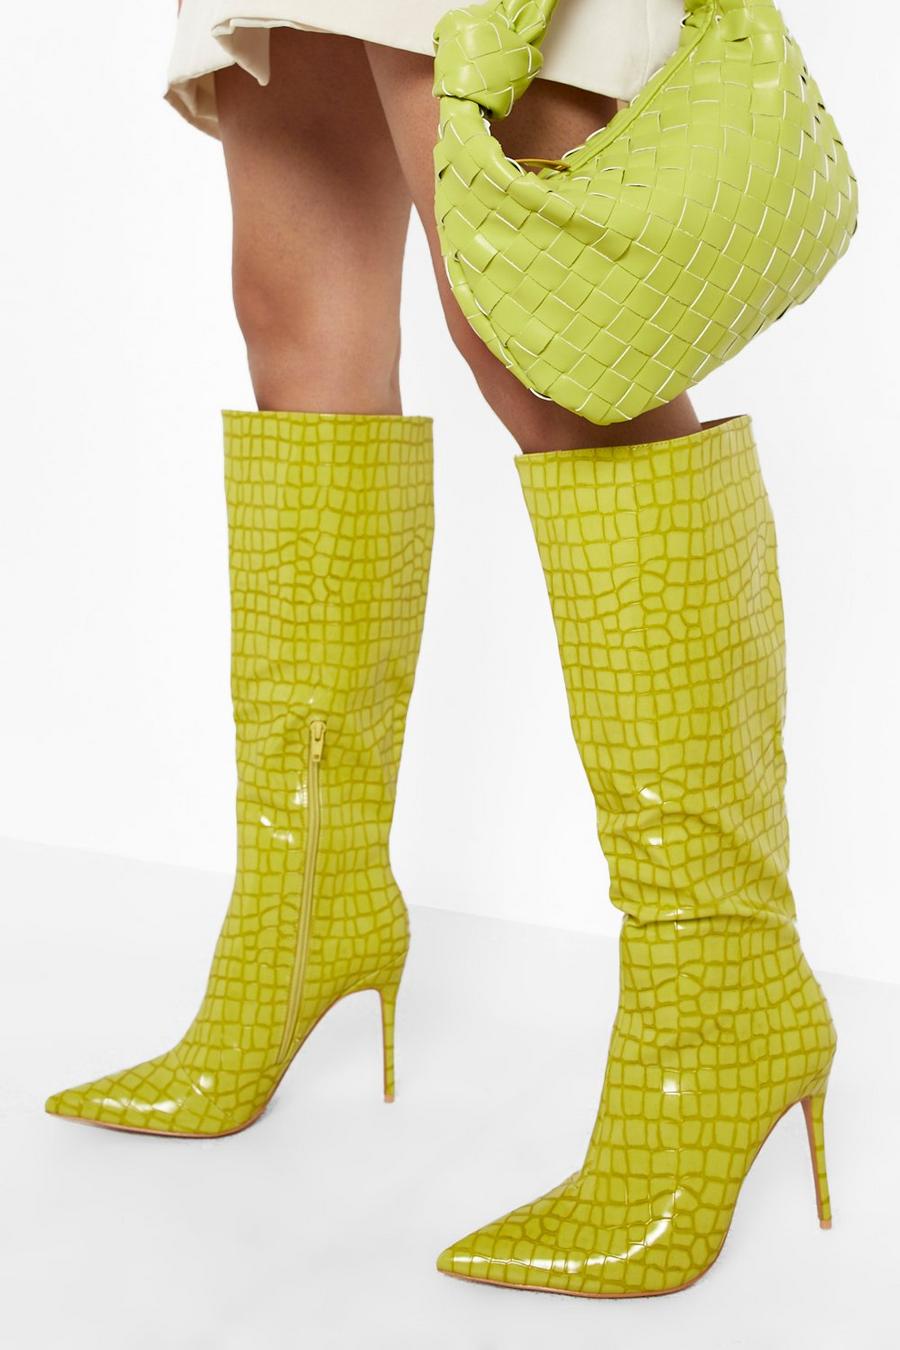 Acid lime yellow Croc Knee High Pointed Stiletto Heel Boots